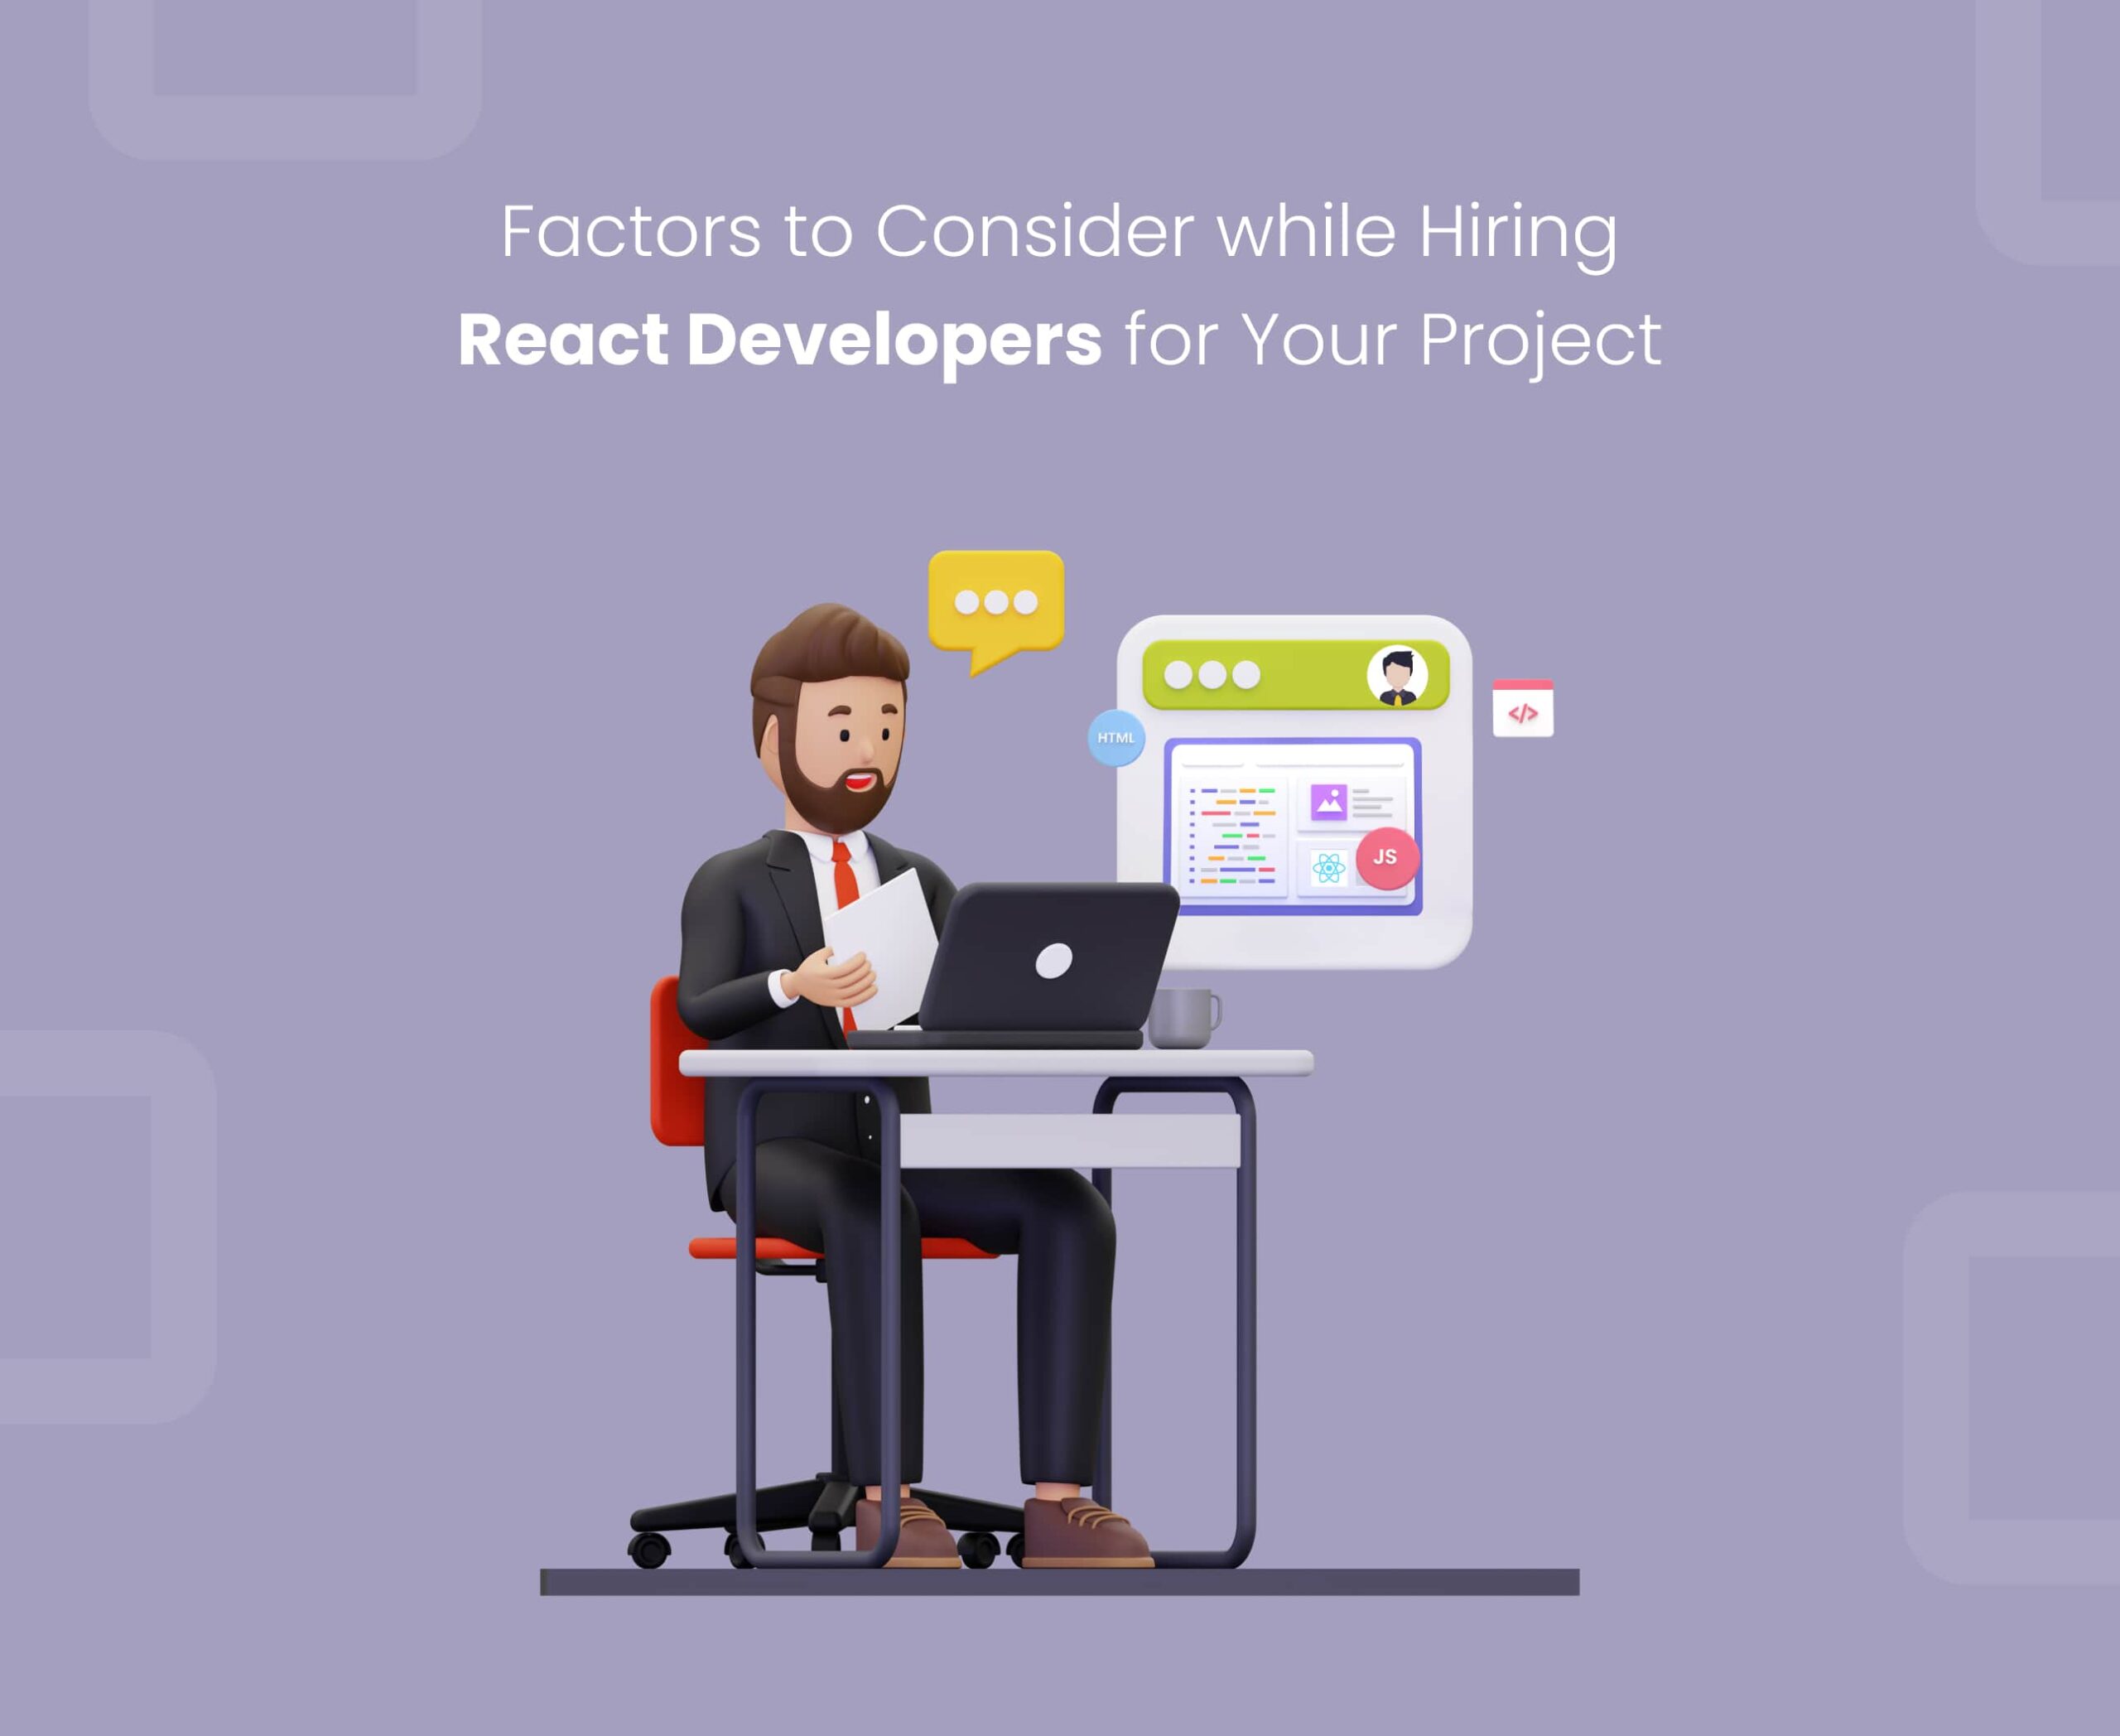 Top Things to Consider While Hiring React Developers